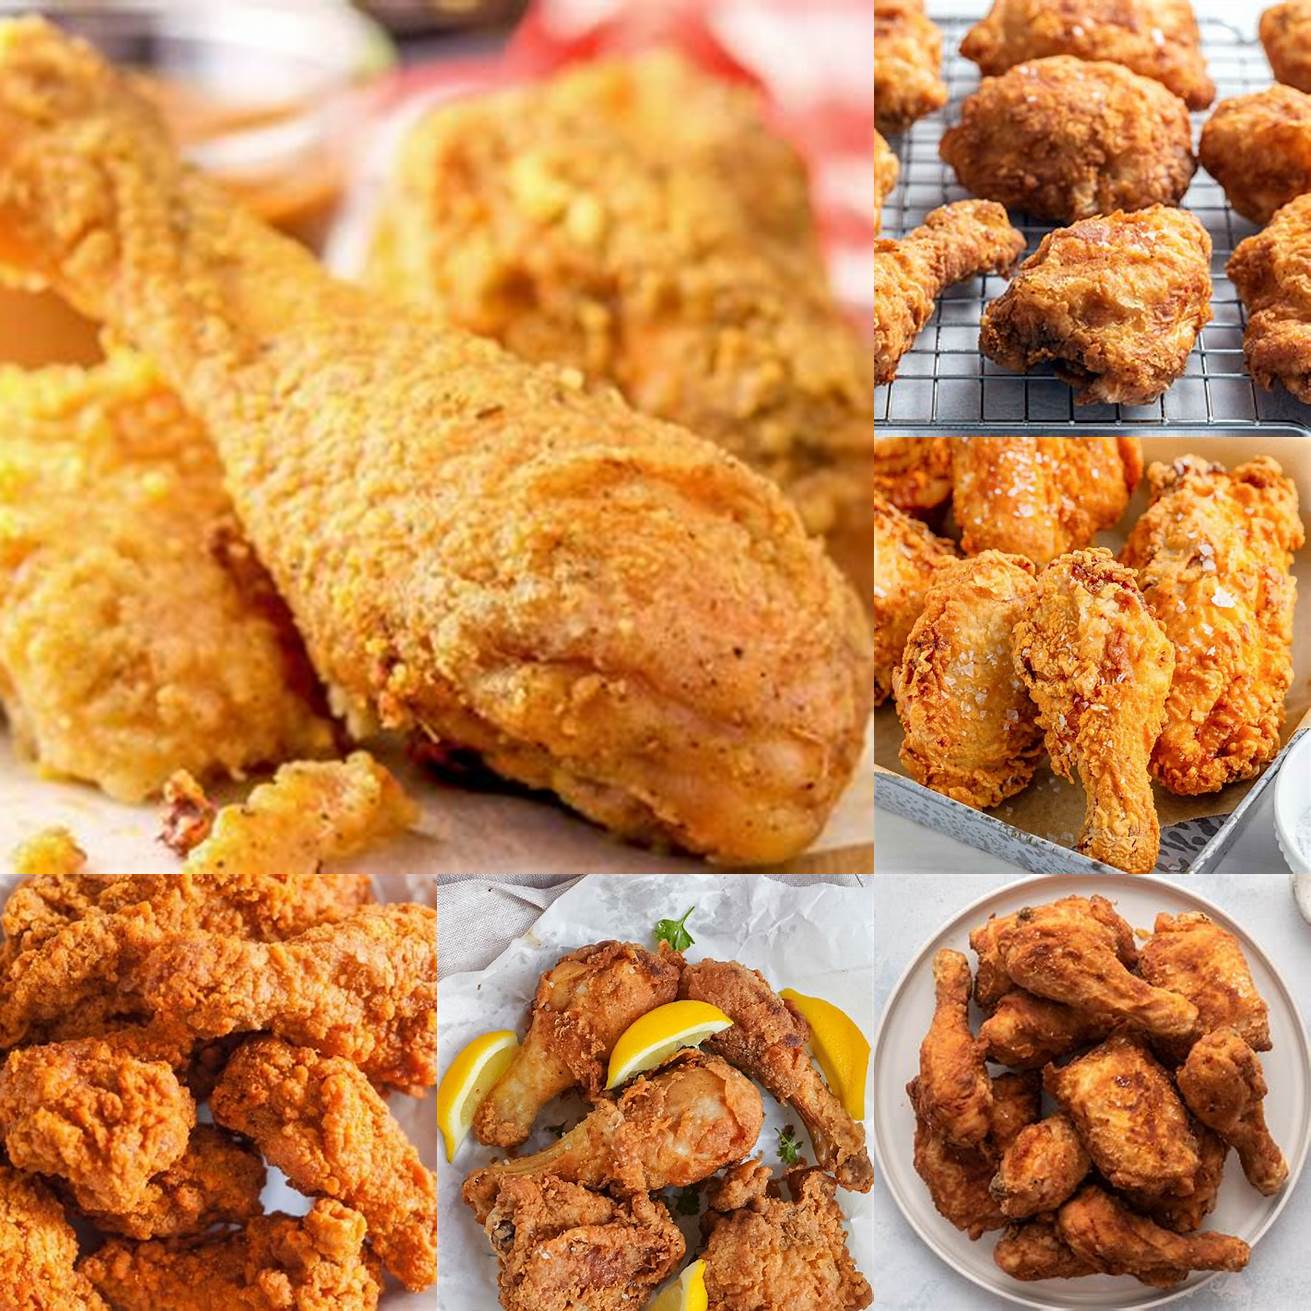 Fried Chicken A Southern classic fried chicken is made with a crispy coating and is often served with sides such as mashed potatoes and gravy